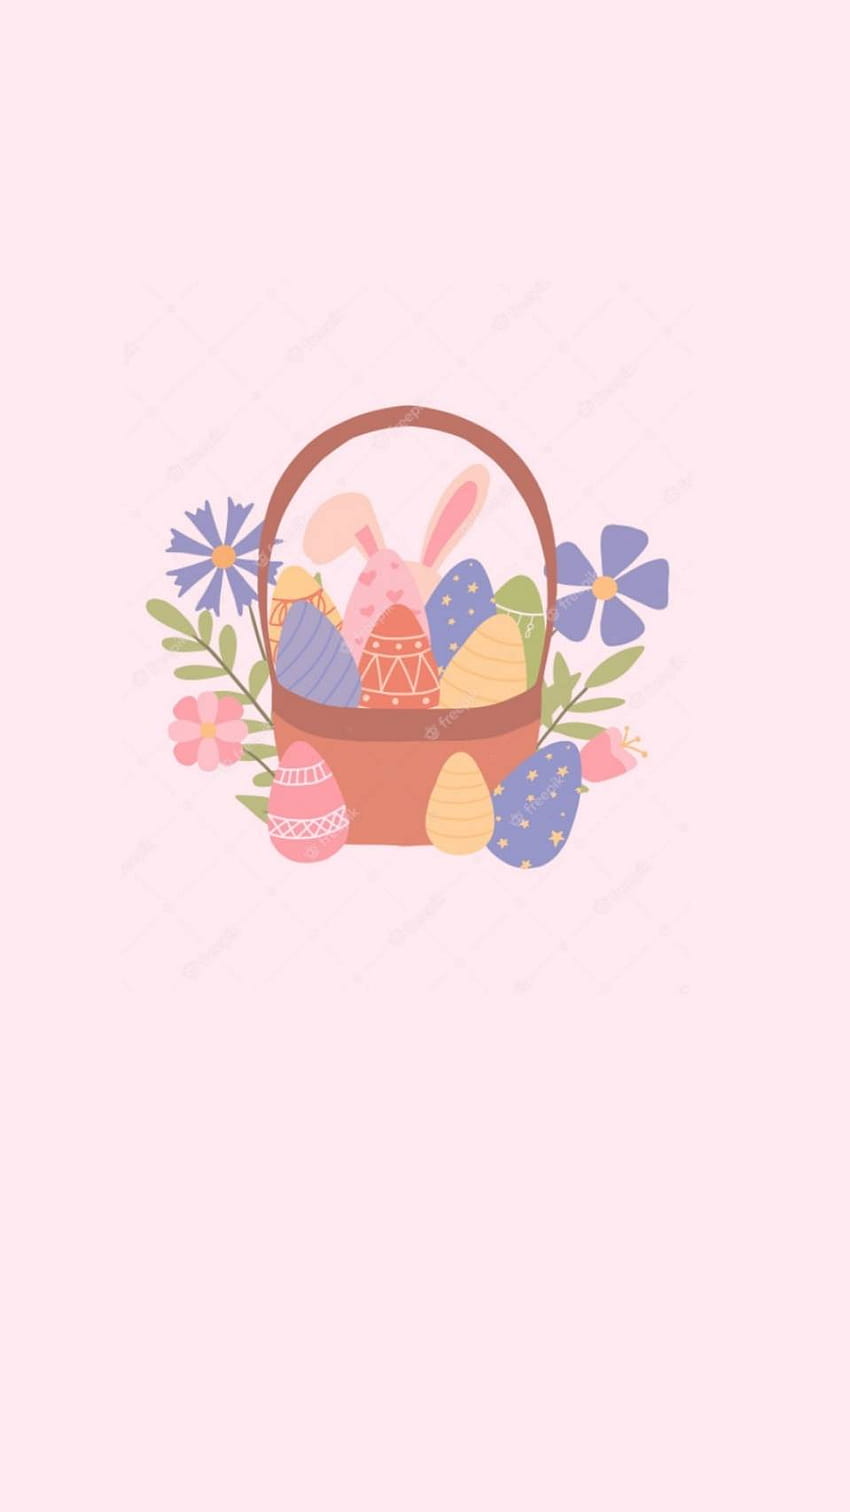 A basket of eggs and flowers - Easter